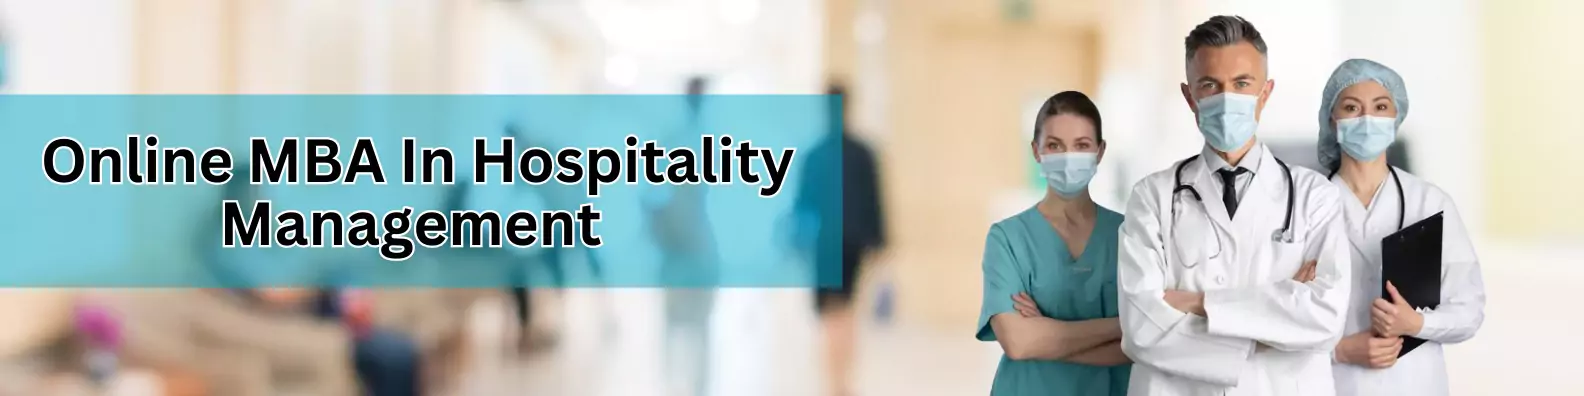 Online MBA in Hospitality